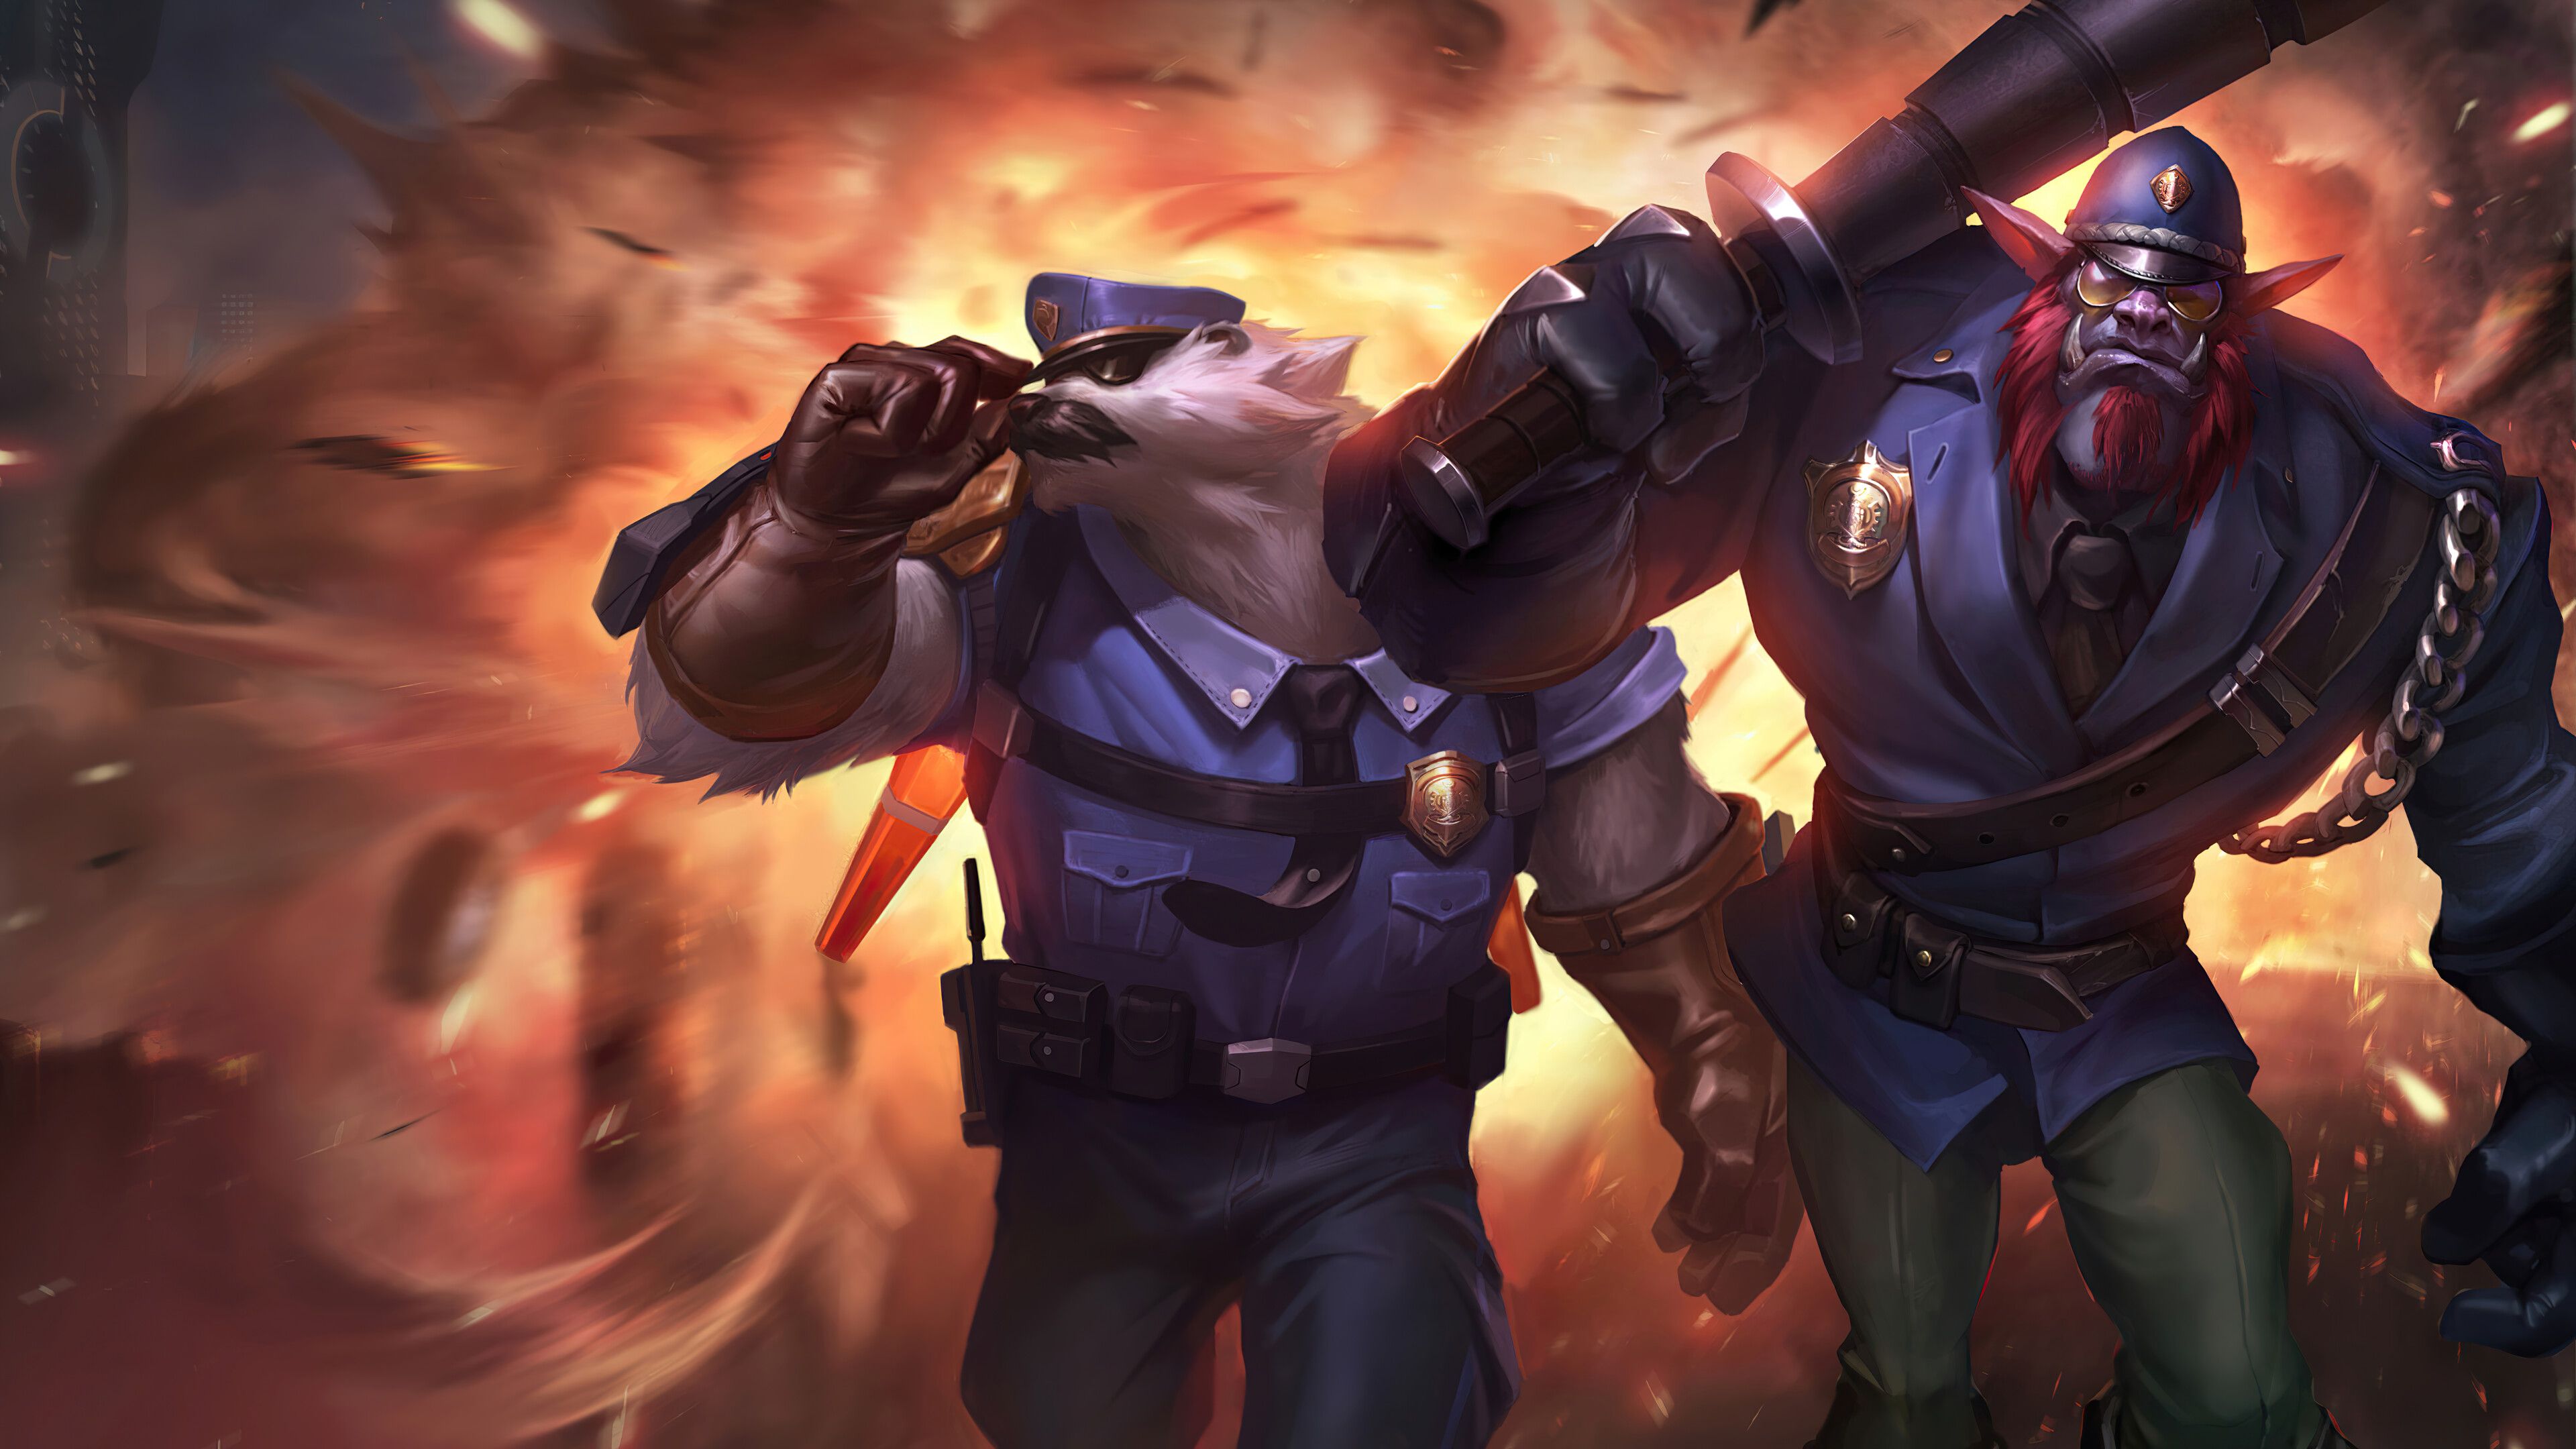 LOL Wallpapers 4K: Volibear rework skins (Thunderlord, Northern Storm, Runeguard, Captain, El Rayo, Thousand Pierced, Classic): League of Legends (2d picture by Riot Games)